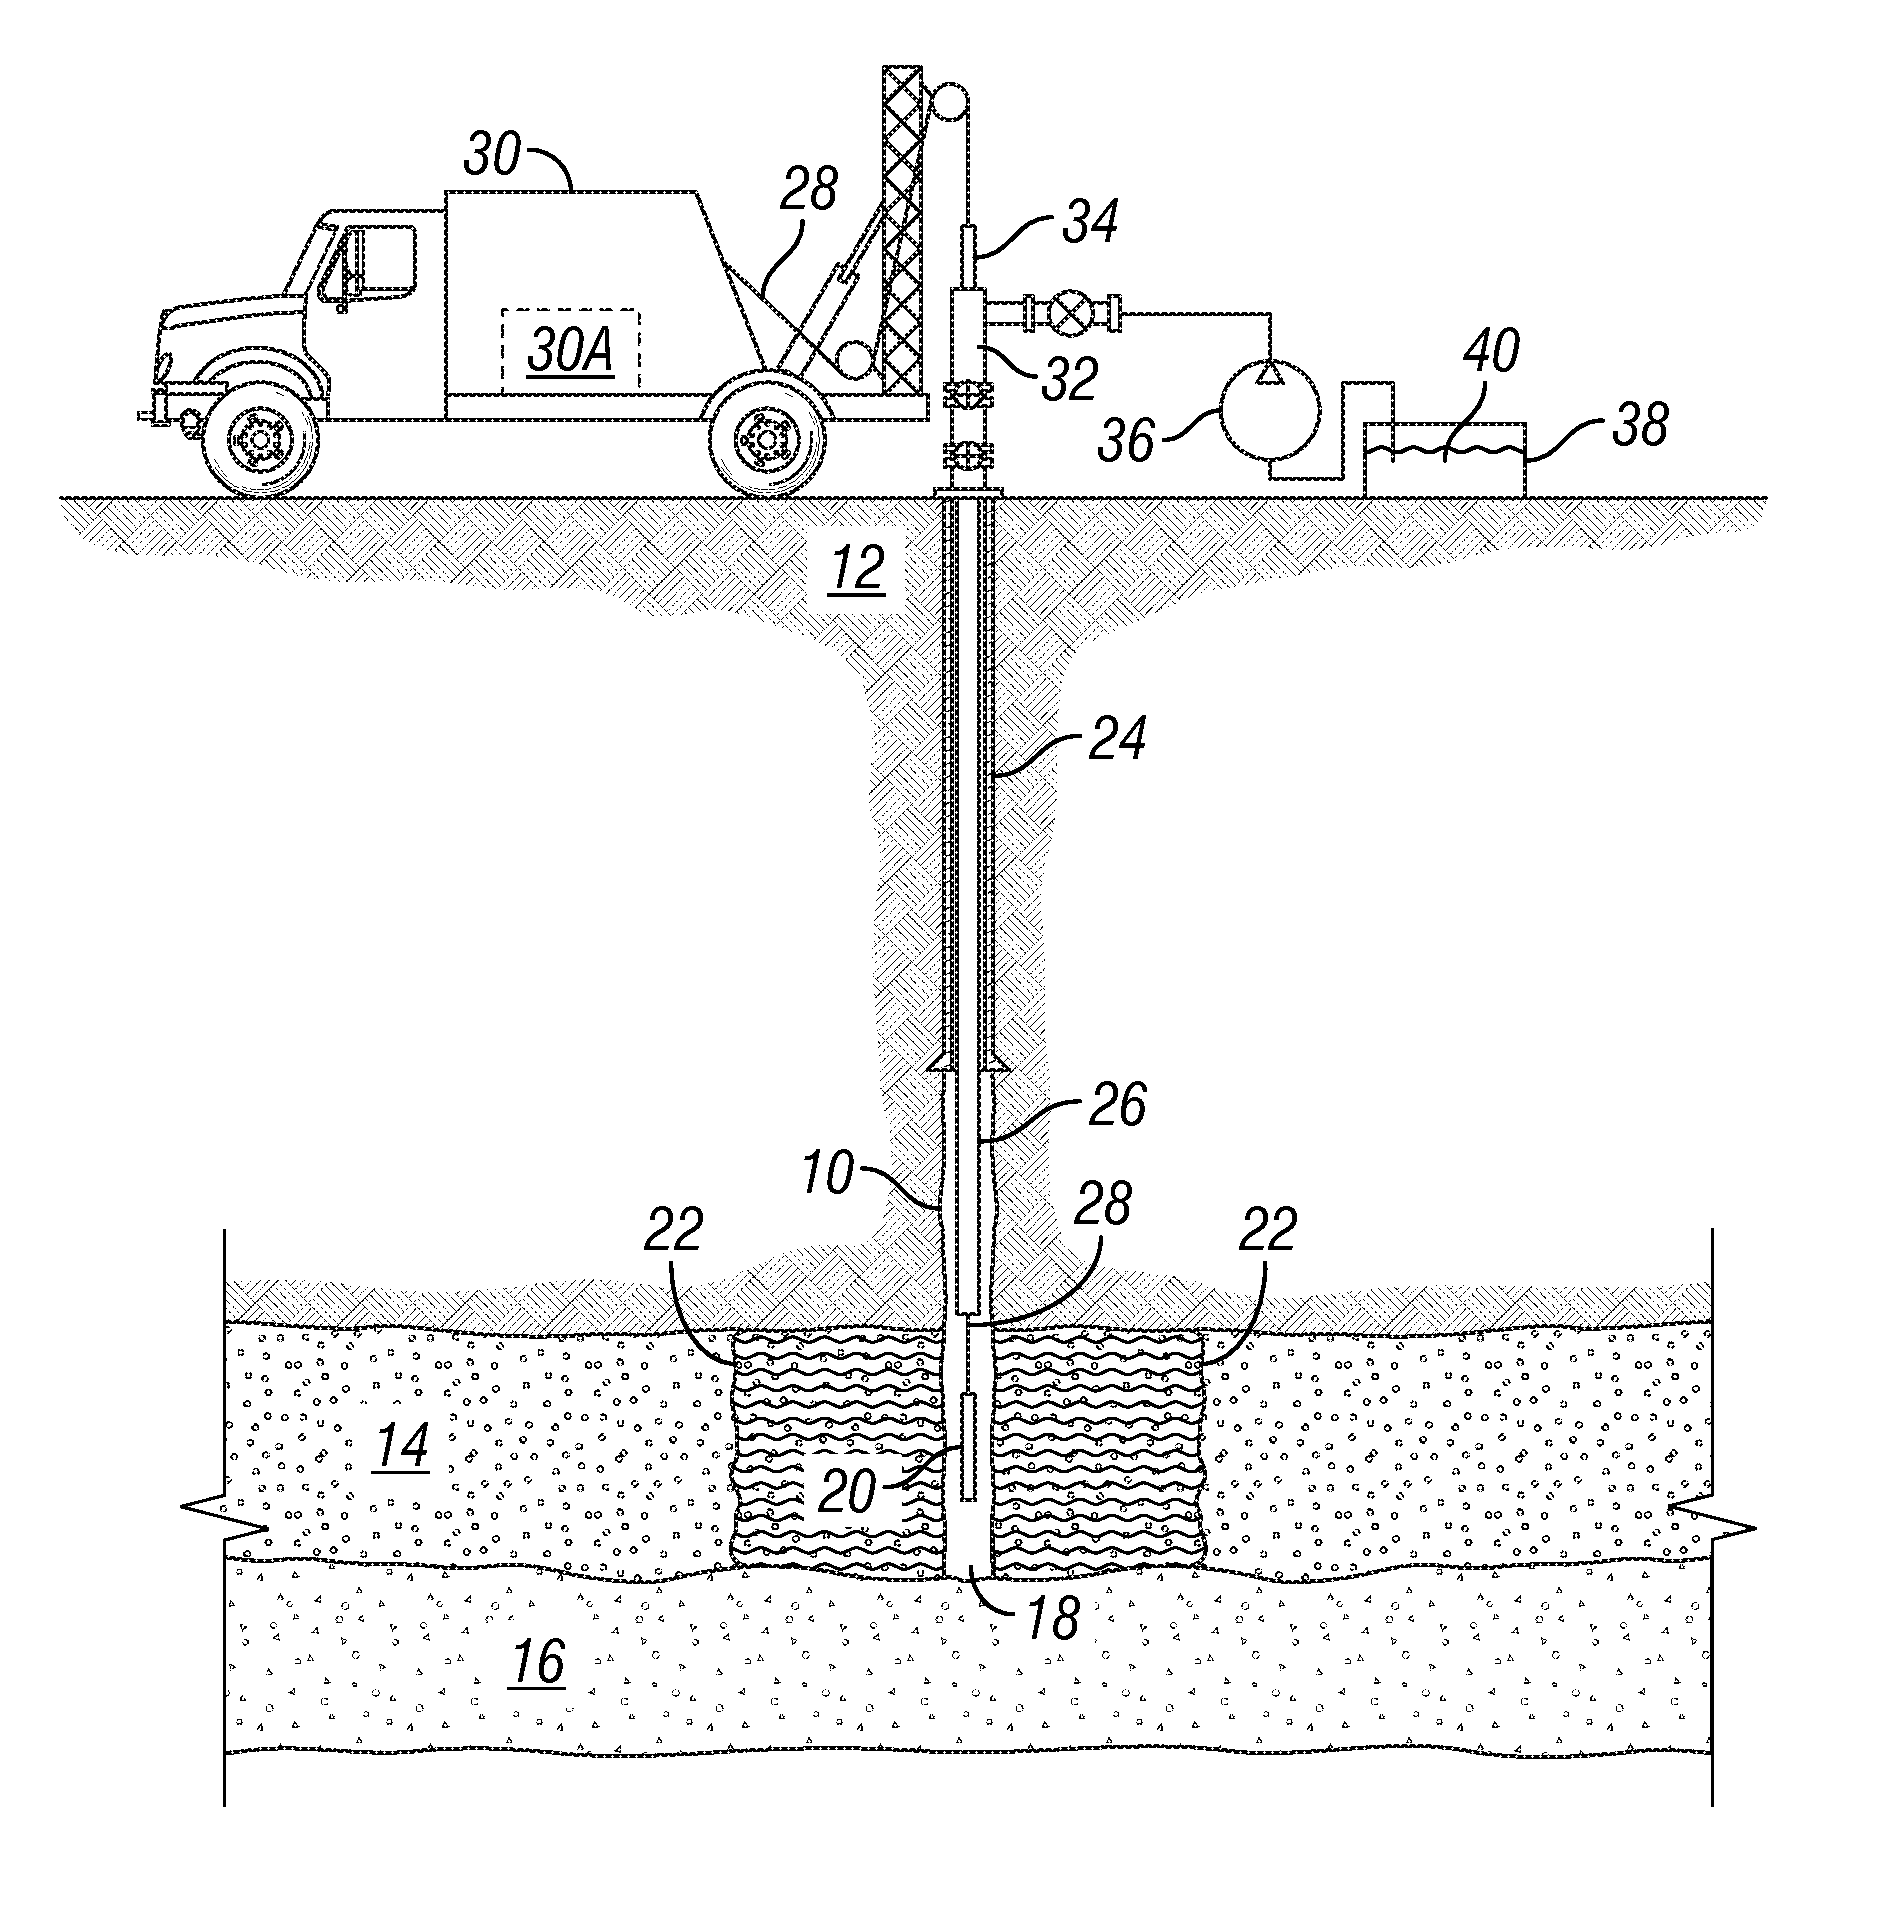 Method for determining spatial distribution of fluid injected into subsurface rock formations